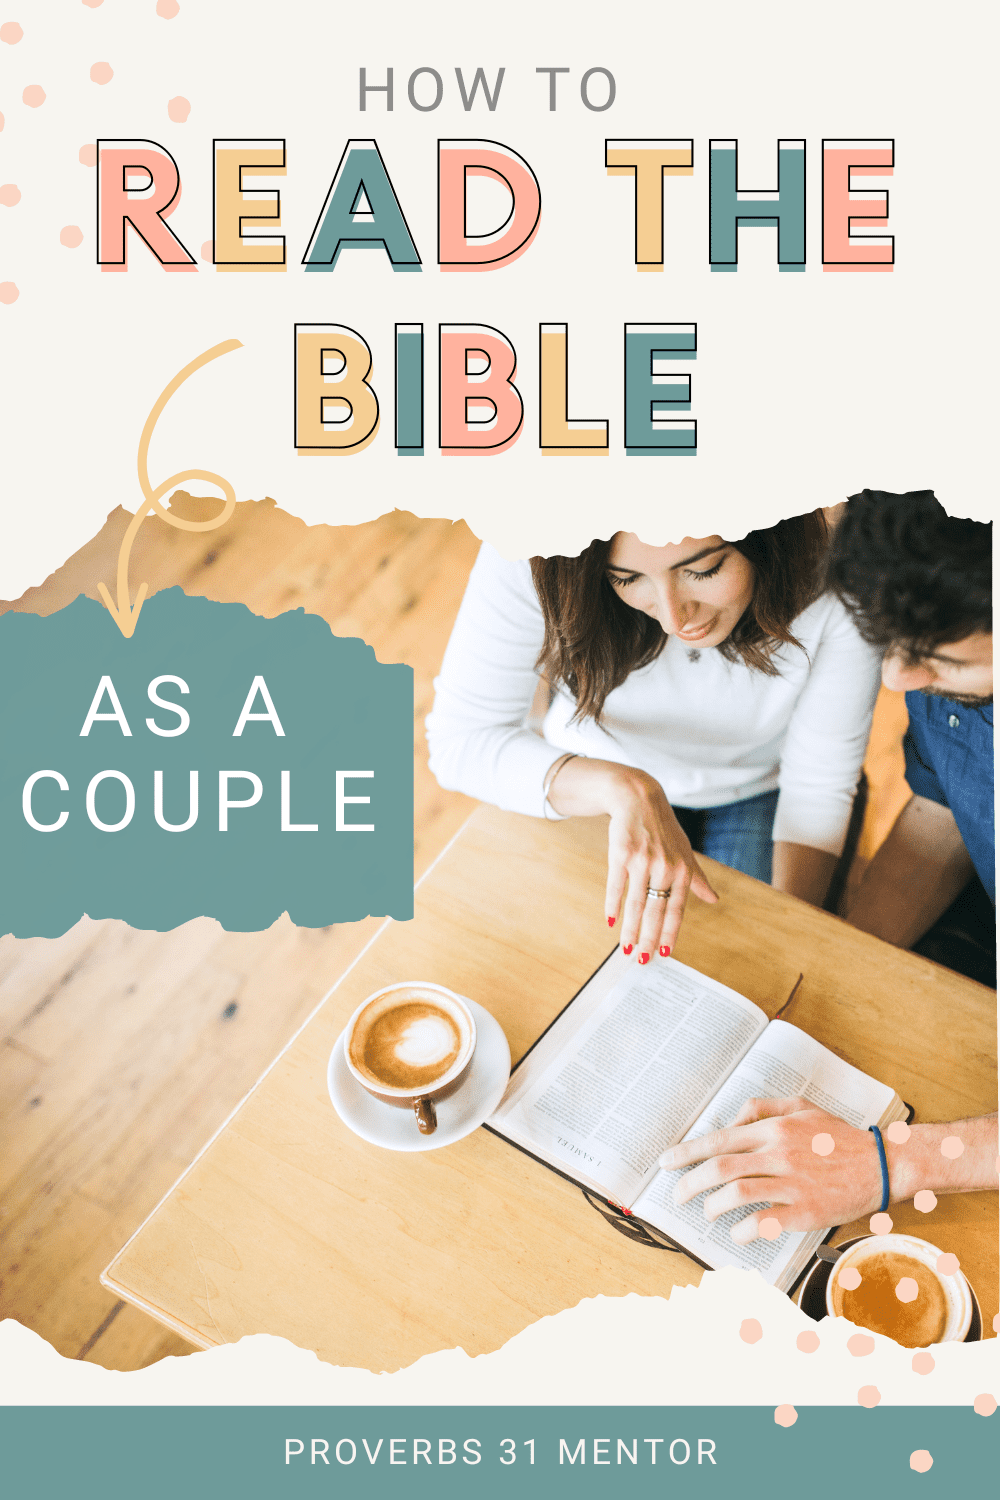 How to Start Reading Scripture and Praying Together - picture of couple reading the Bible